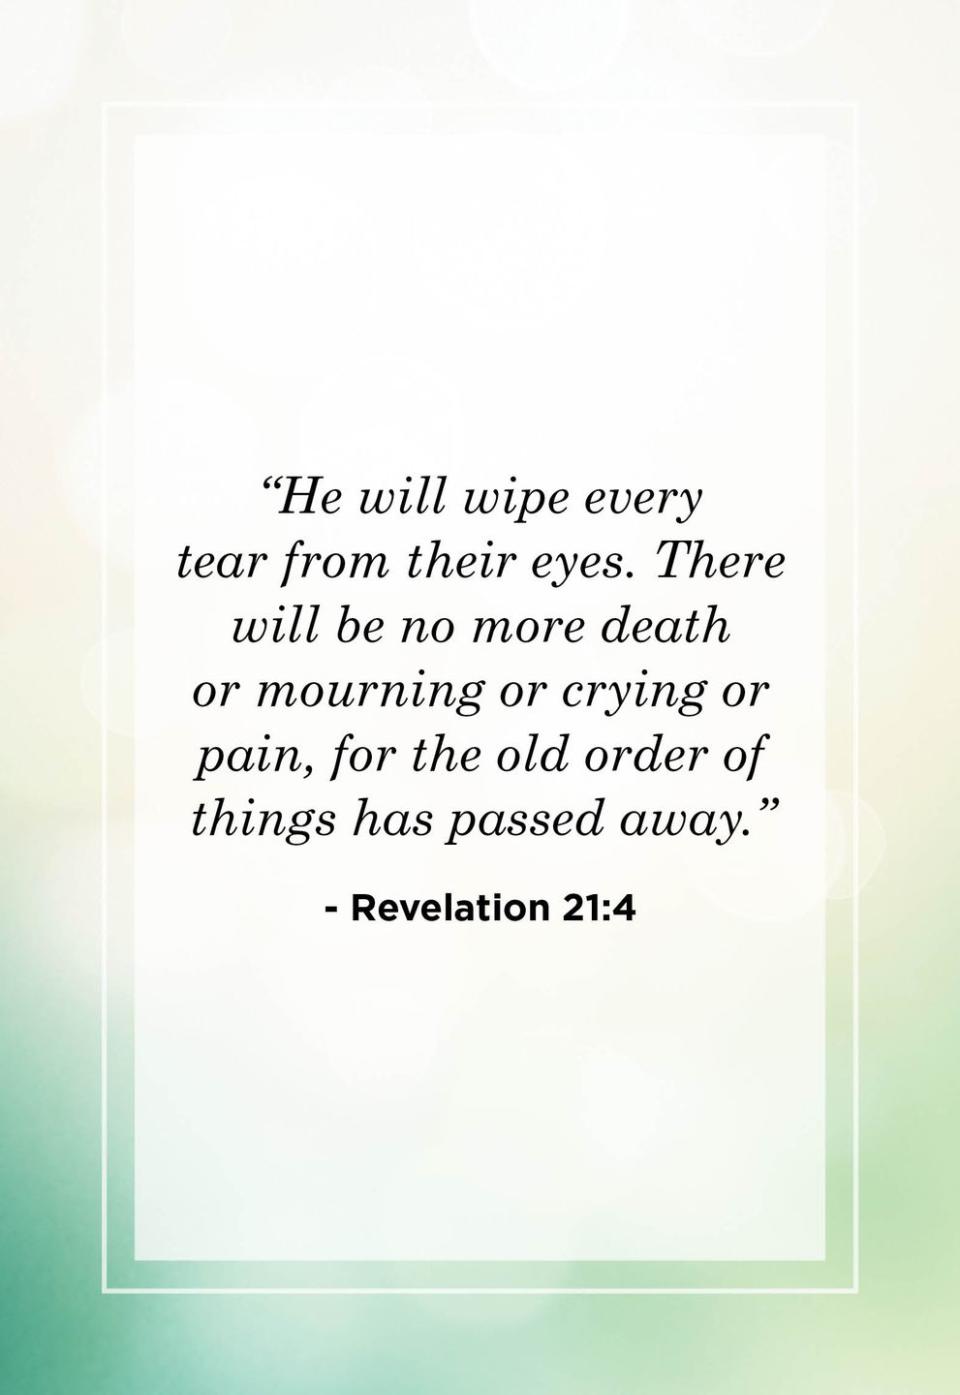 <p>"He will wipe every tear from their eyes. There will be no more death or mourning or crying or pain, for the old order of things has passed away."</p>